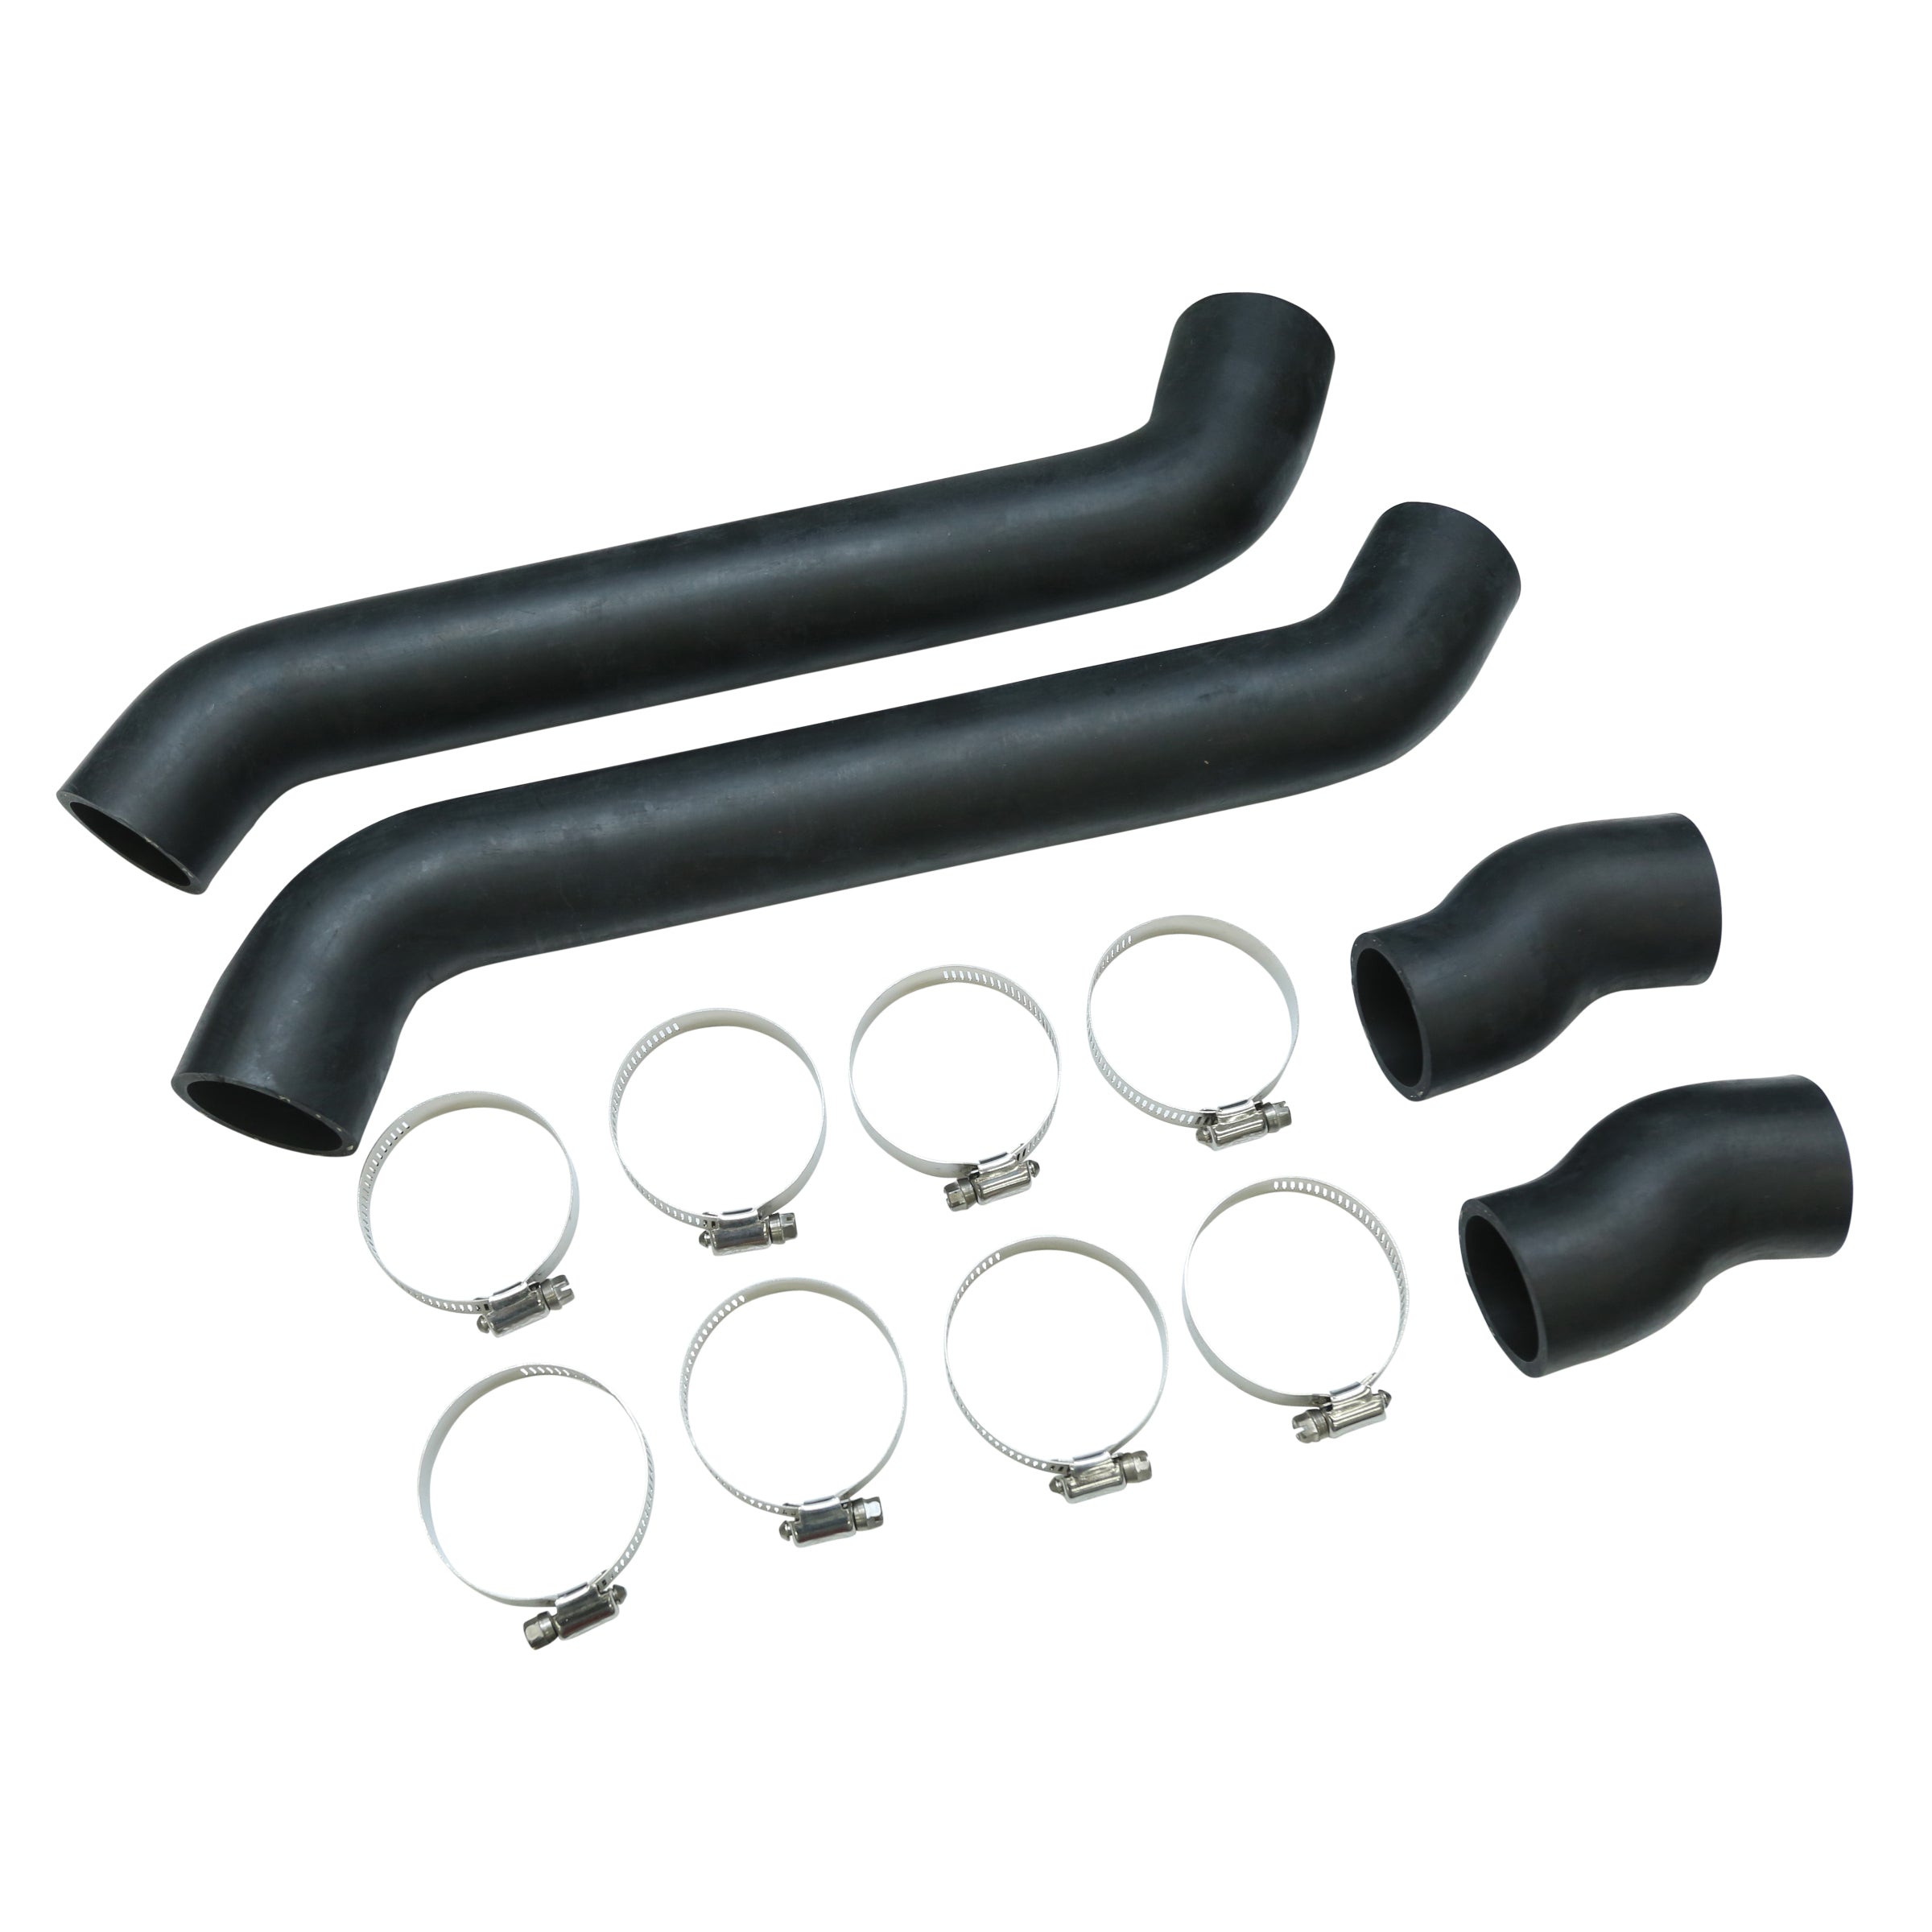 Radiator Hose Kit • 1935-36 Ford V-8 With 1937-48 Ford Flathead (Stock Fan)